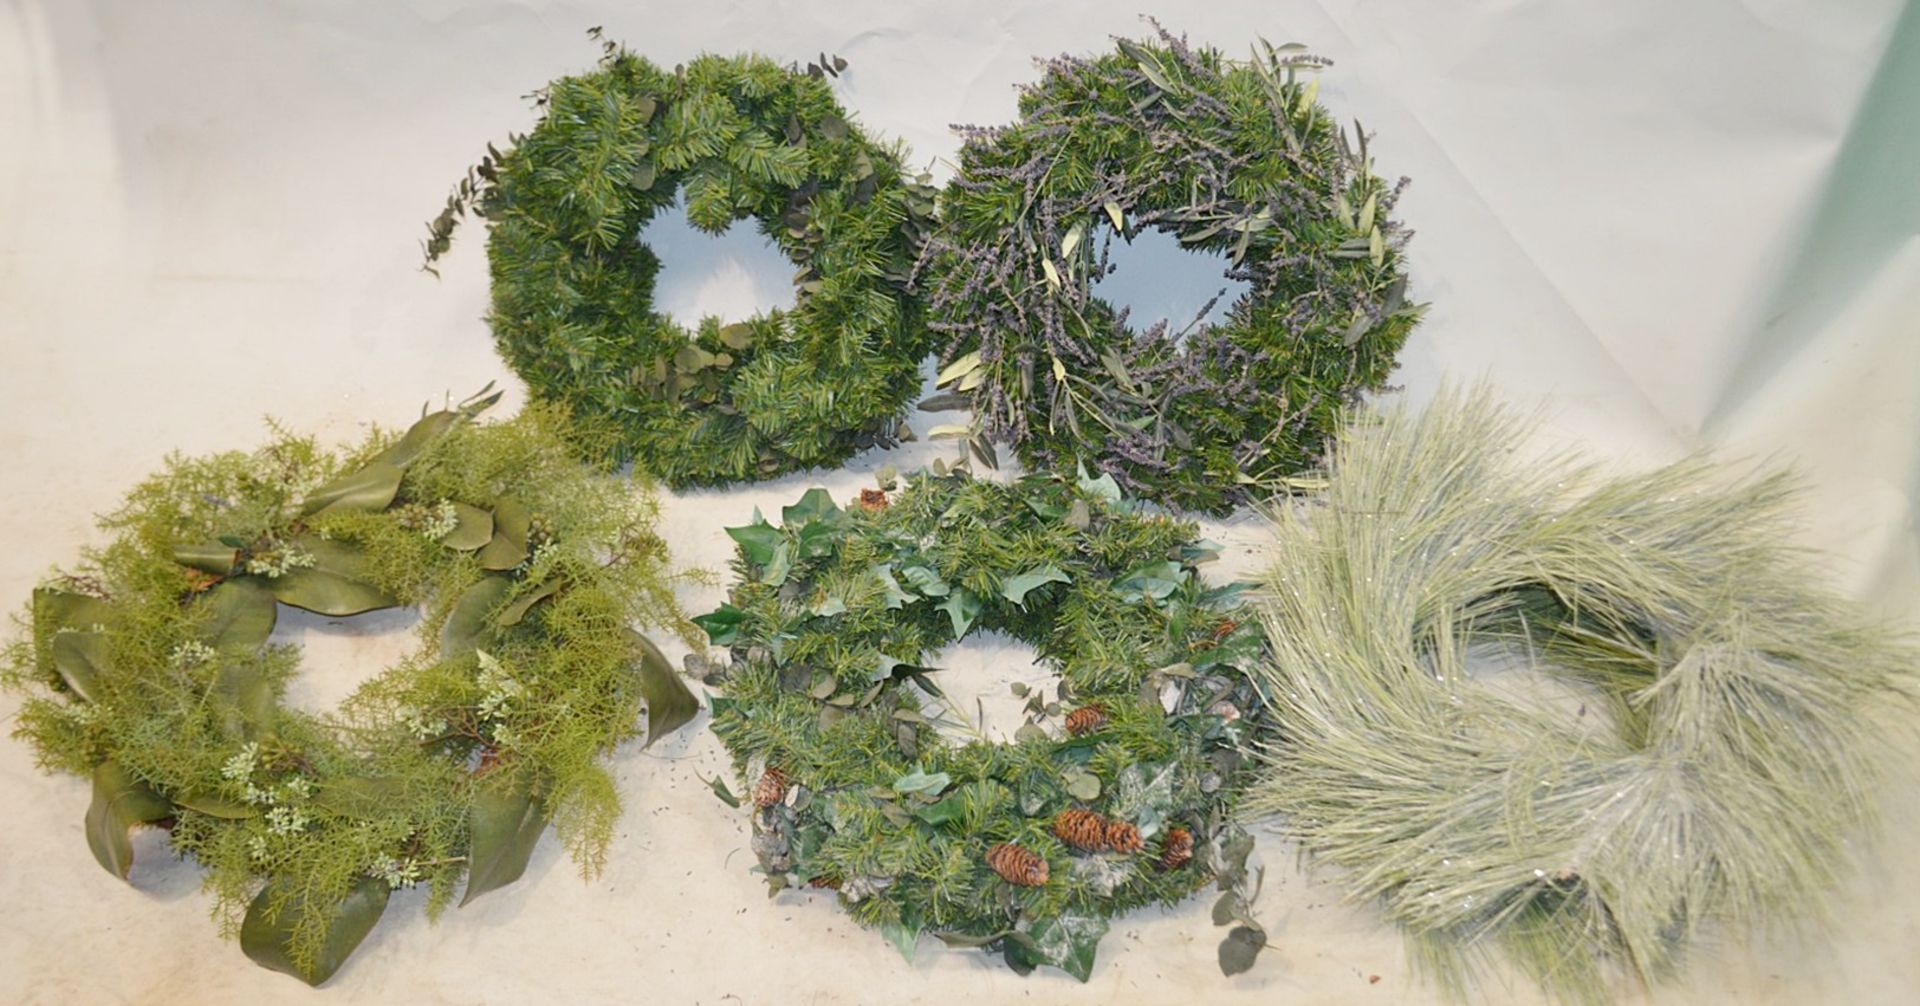 5 x Commercial Decorative Christmas Wreaths - Variety As Shown - Mostly 50cm In Diameter - Ex-